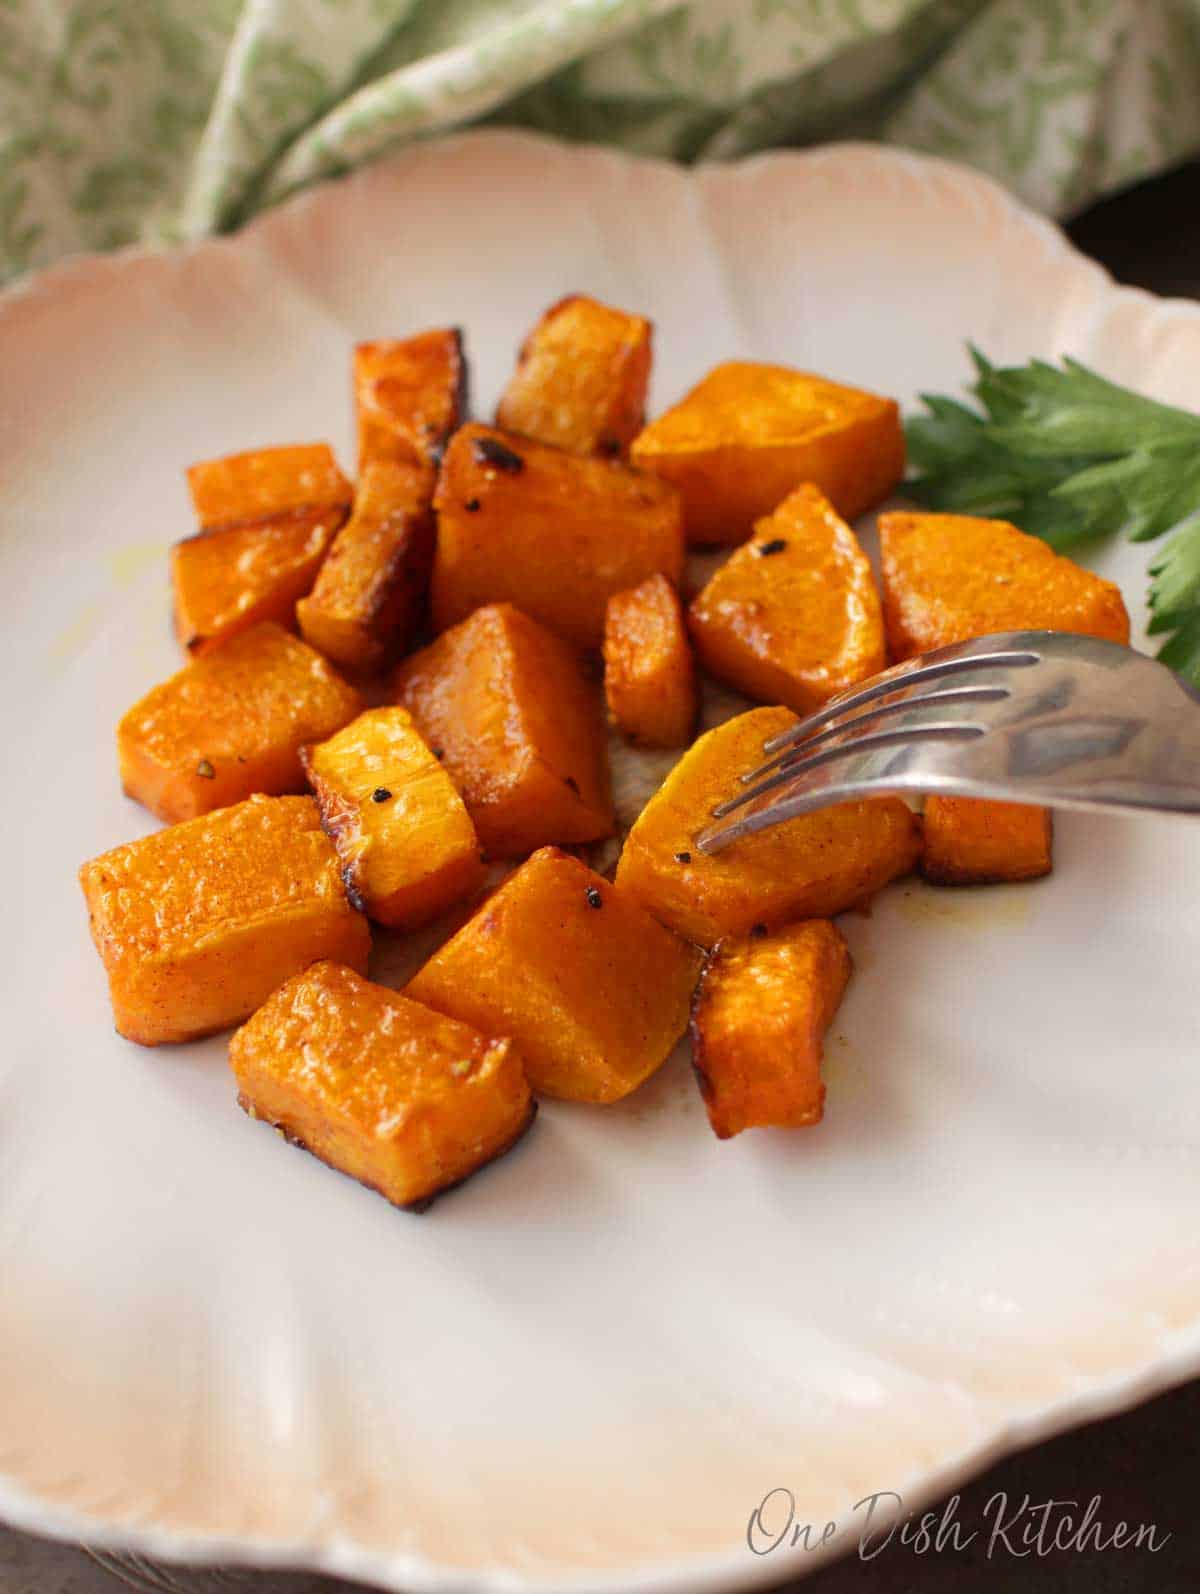 A fork diving into a plate of roasted butternut squash